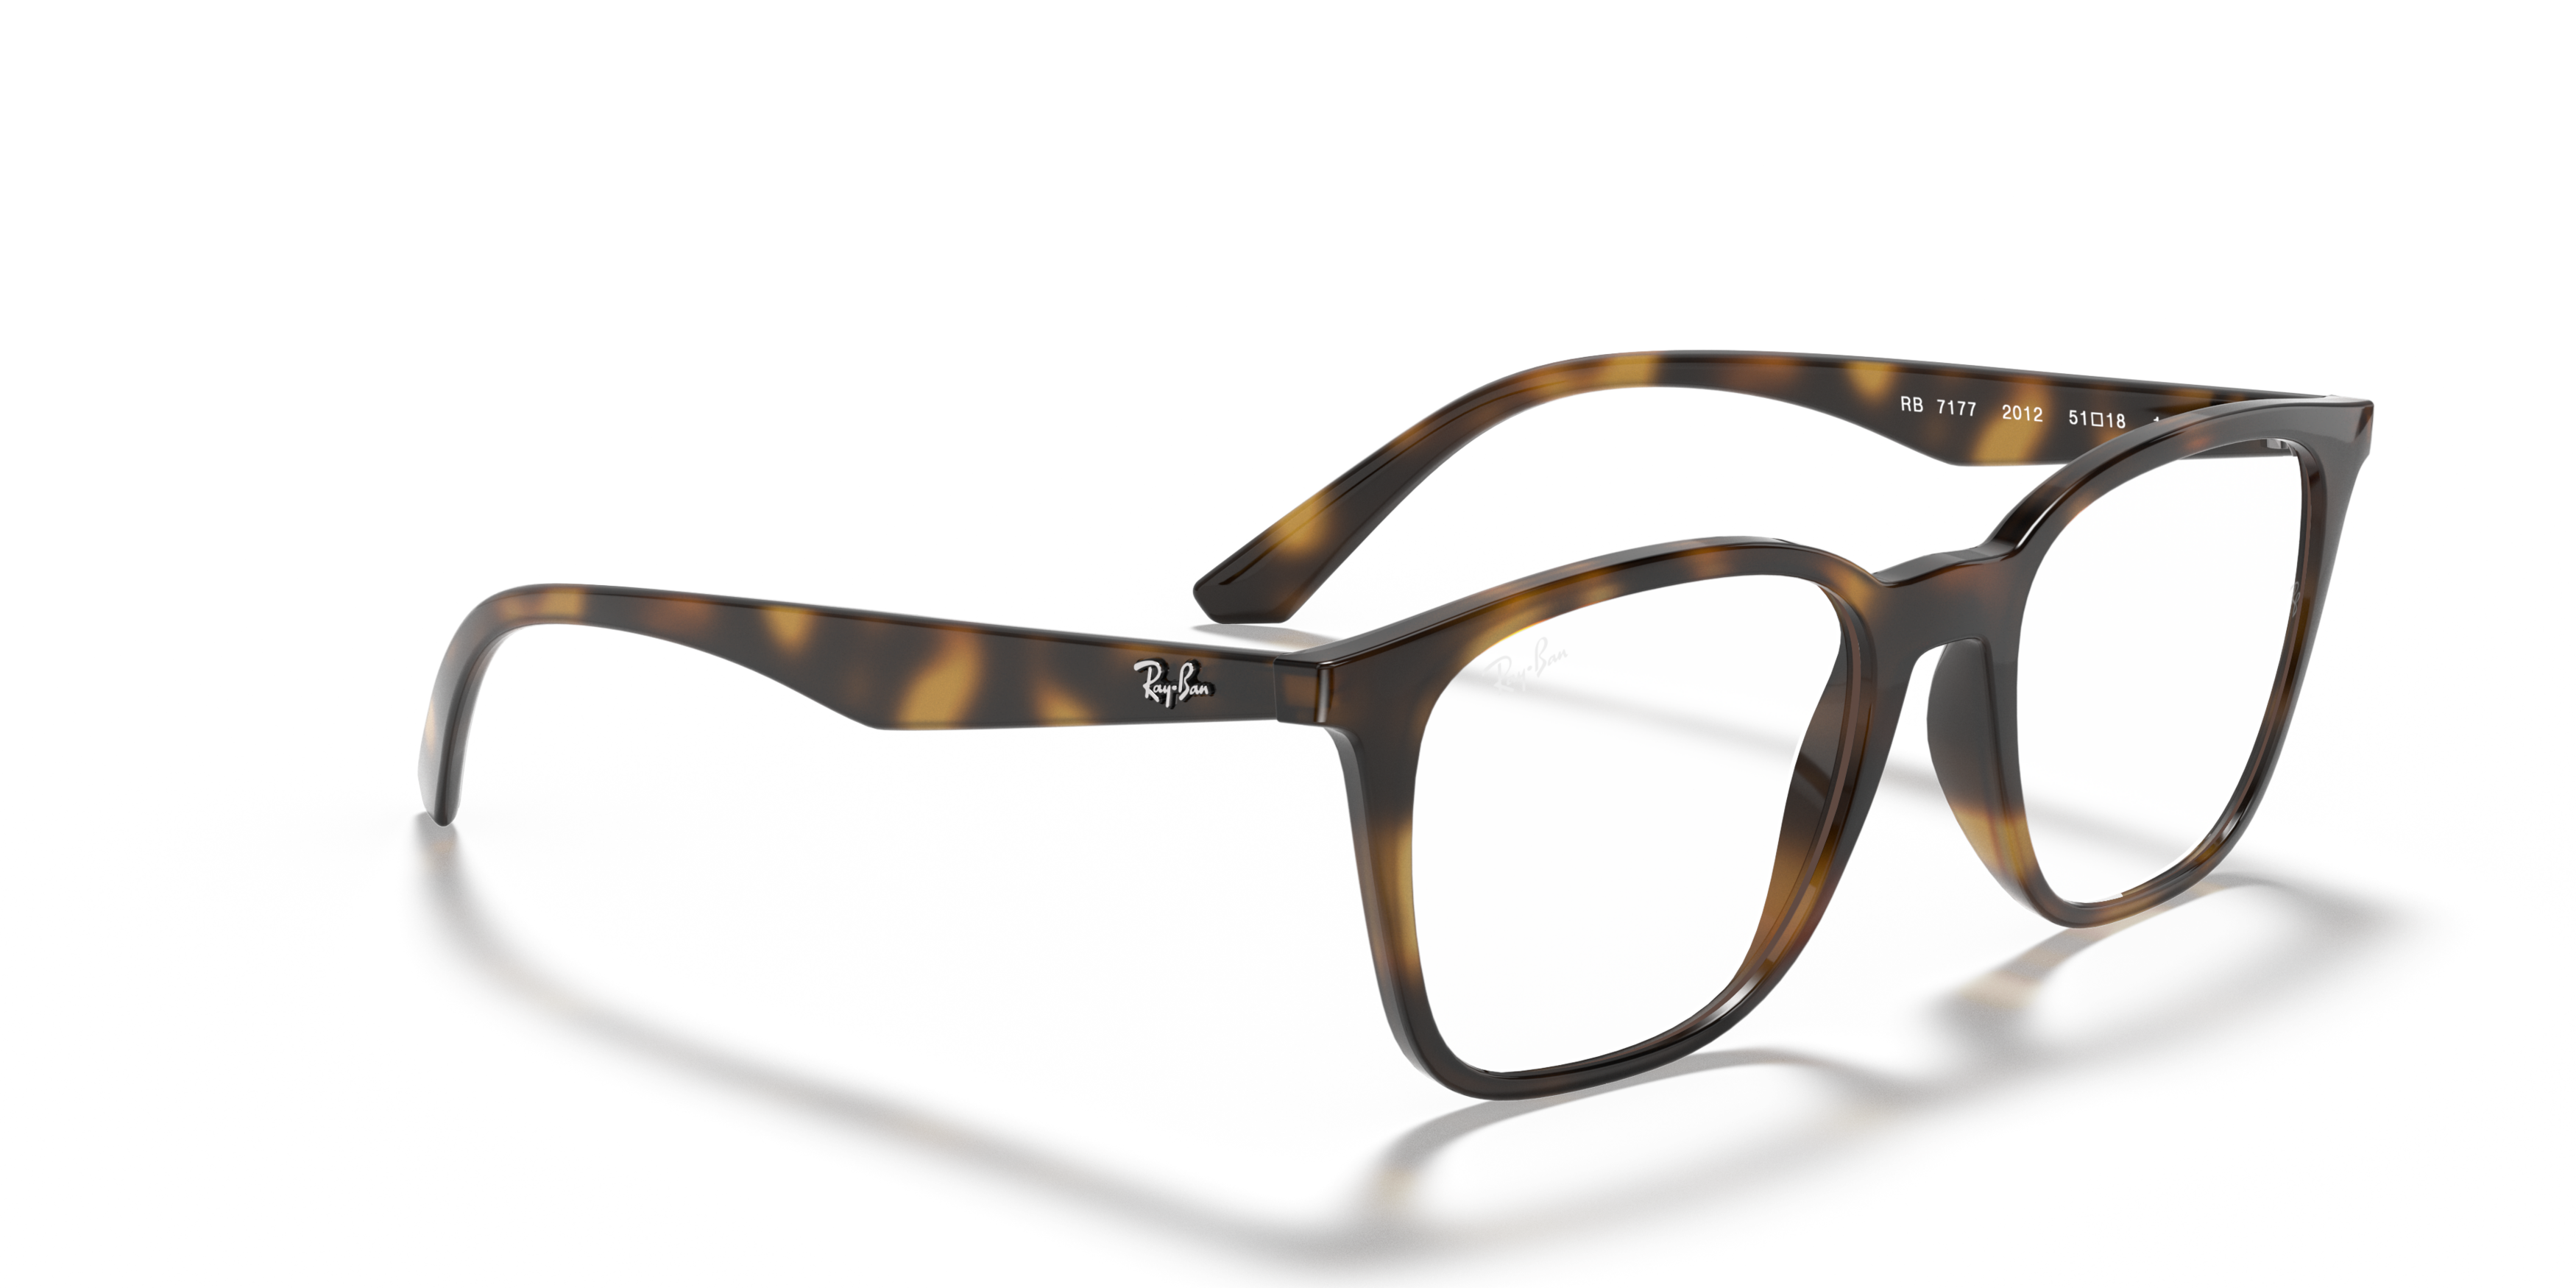 Angle_Right01 Ray-Ban RX 7177 Glasses Transparent / Tortoise Shell